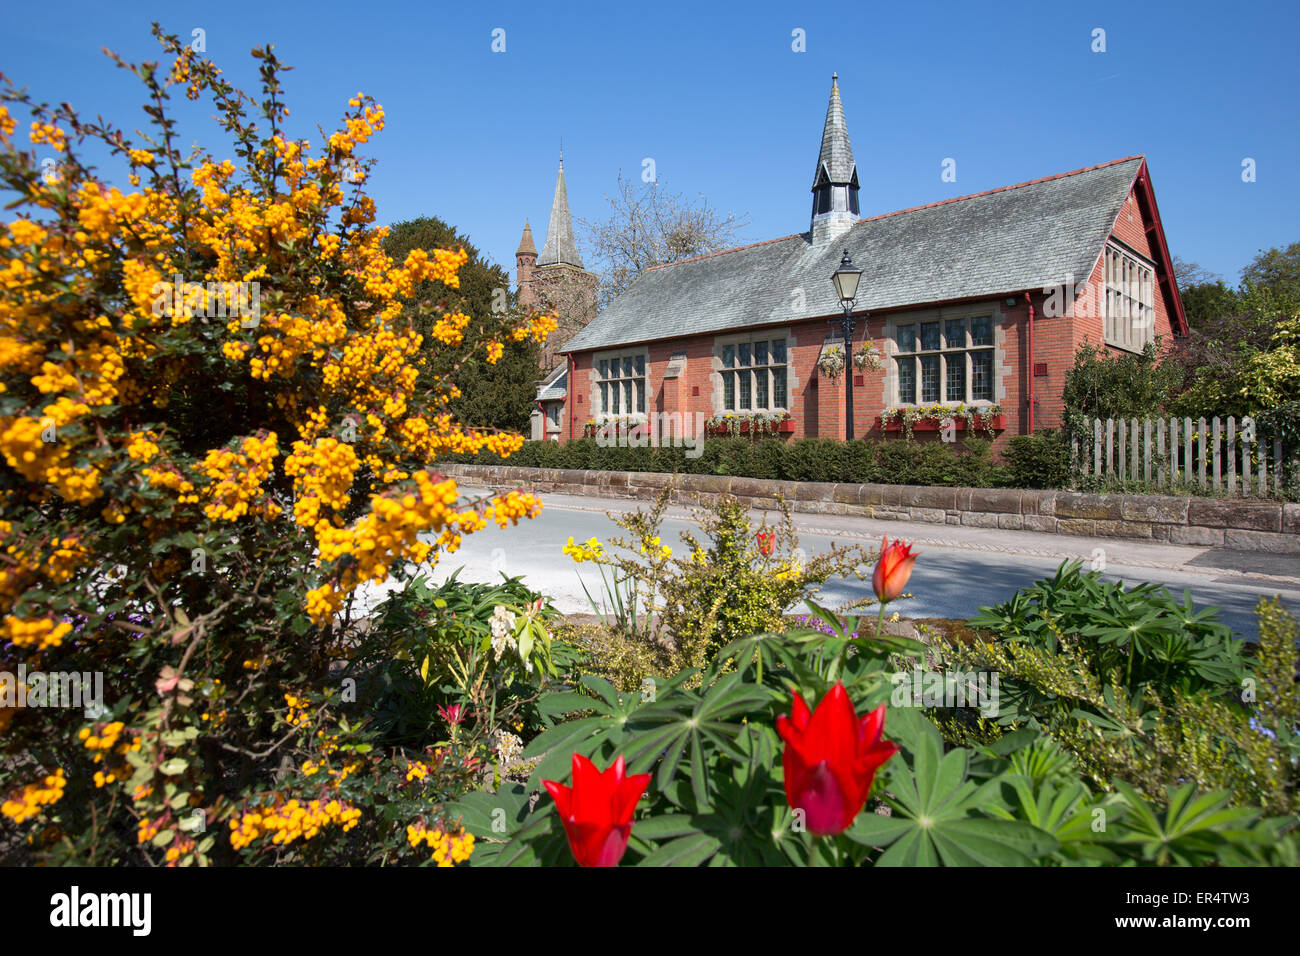 Village of Aldford, England. Picturesque spring view of Aldford Village Hall in Church Lane. Stock Photo